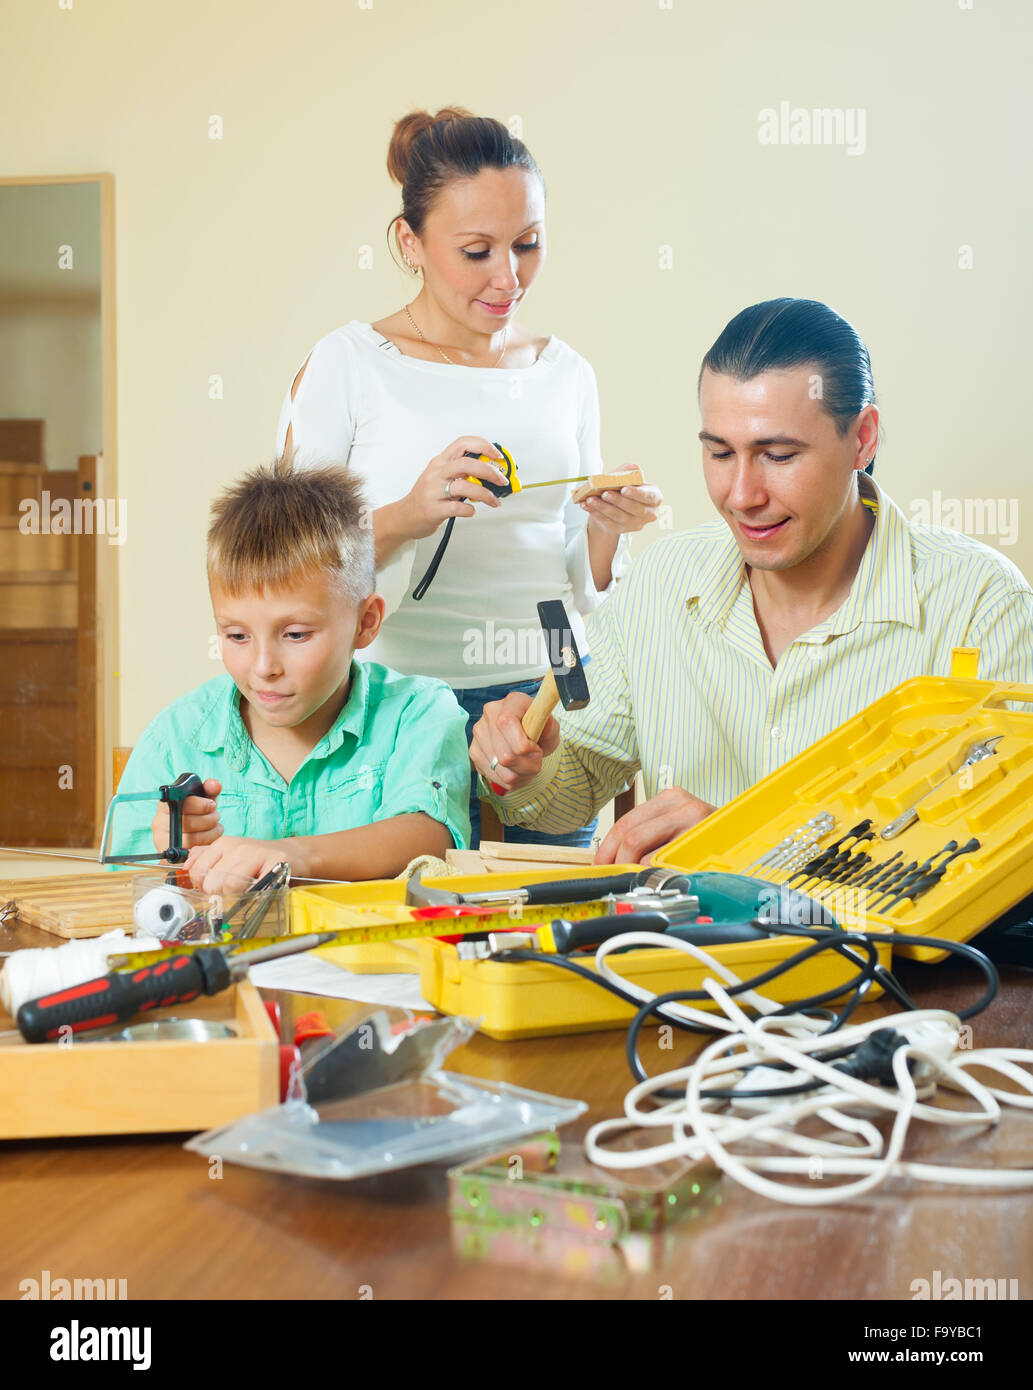 Happy family of three doing something with working tools at home Stock Photo